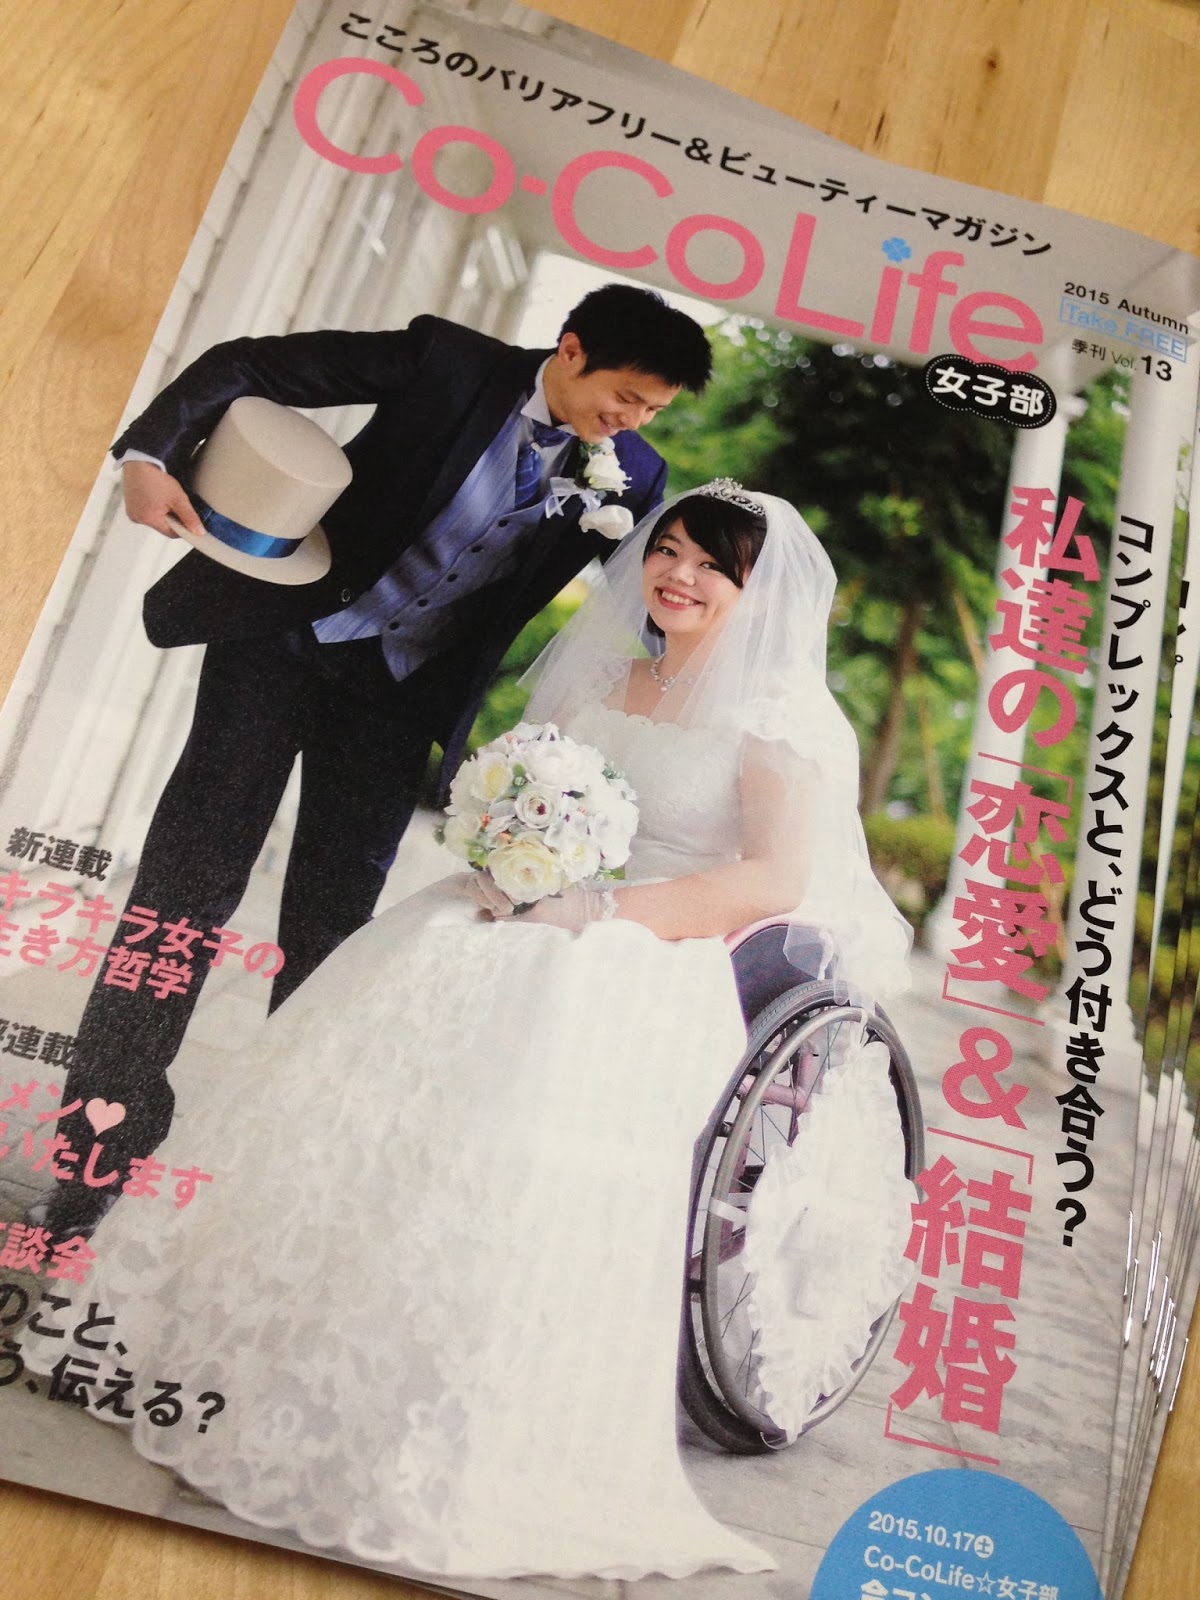 We are on the cover page of Co-Co Life